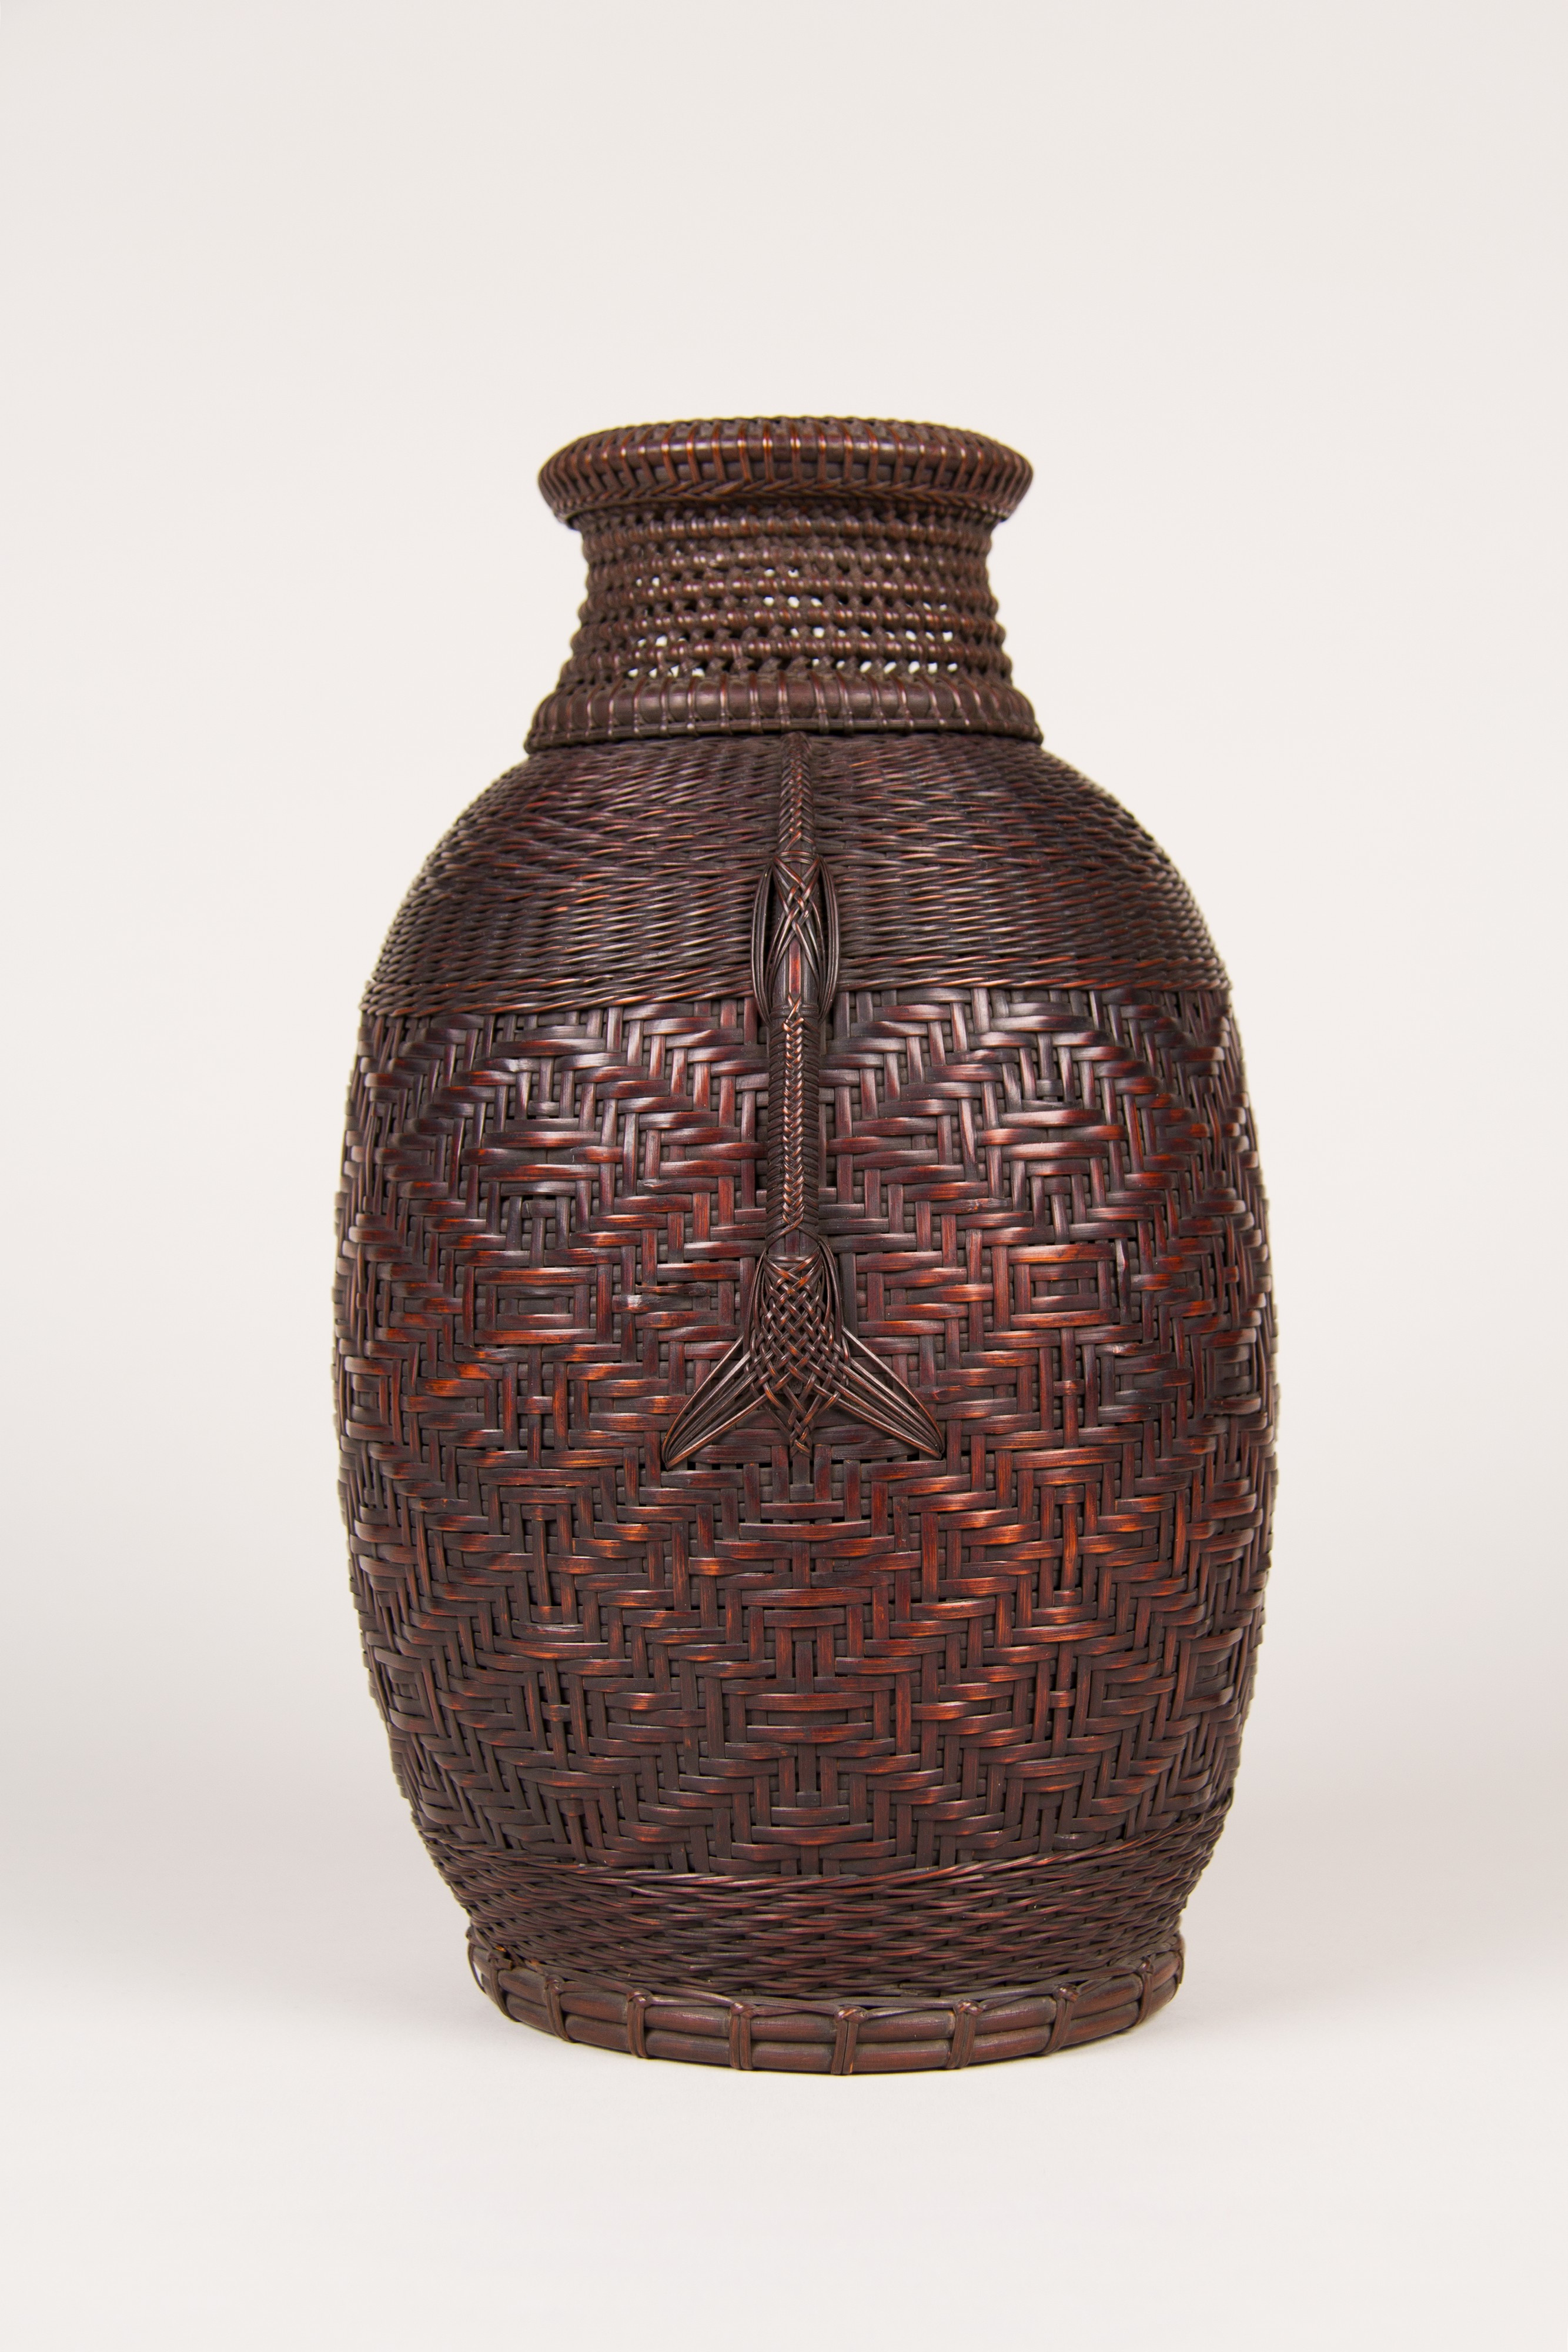 11 Recommended Brown Ceramic Vase 2024 free download brown ceramic vase of fileec28ac2b1cc2b1c283 flower basket met 91 1 2092 s1 sf wikimedia commons pertaining to fileec28ac2b1cc2b1c283 flower basket met 91 1 2092 s1 sf